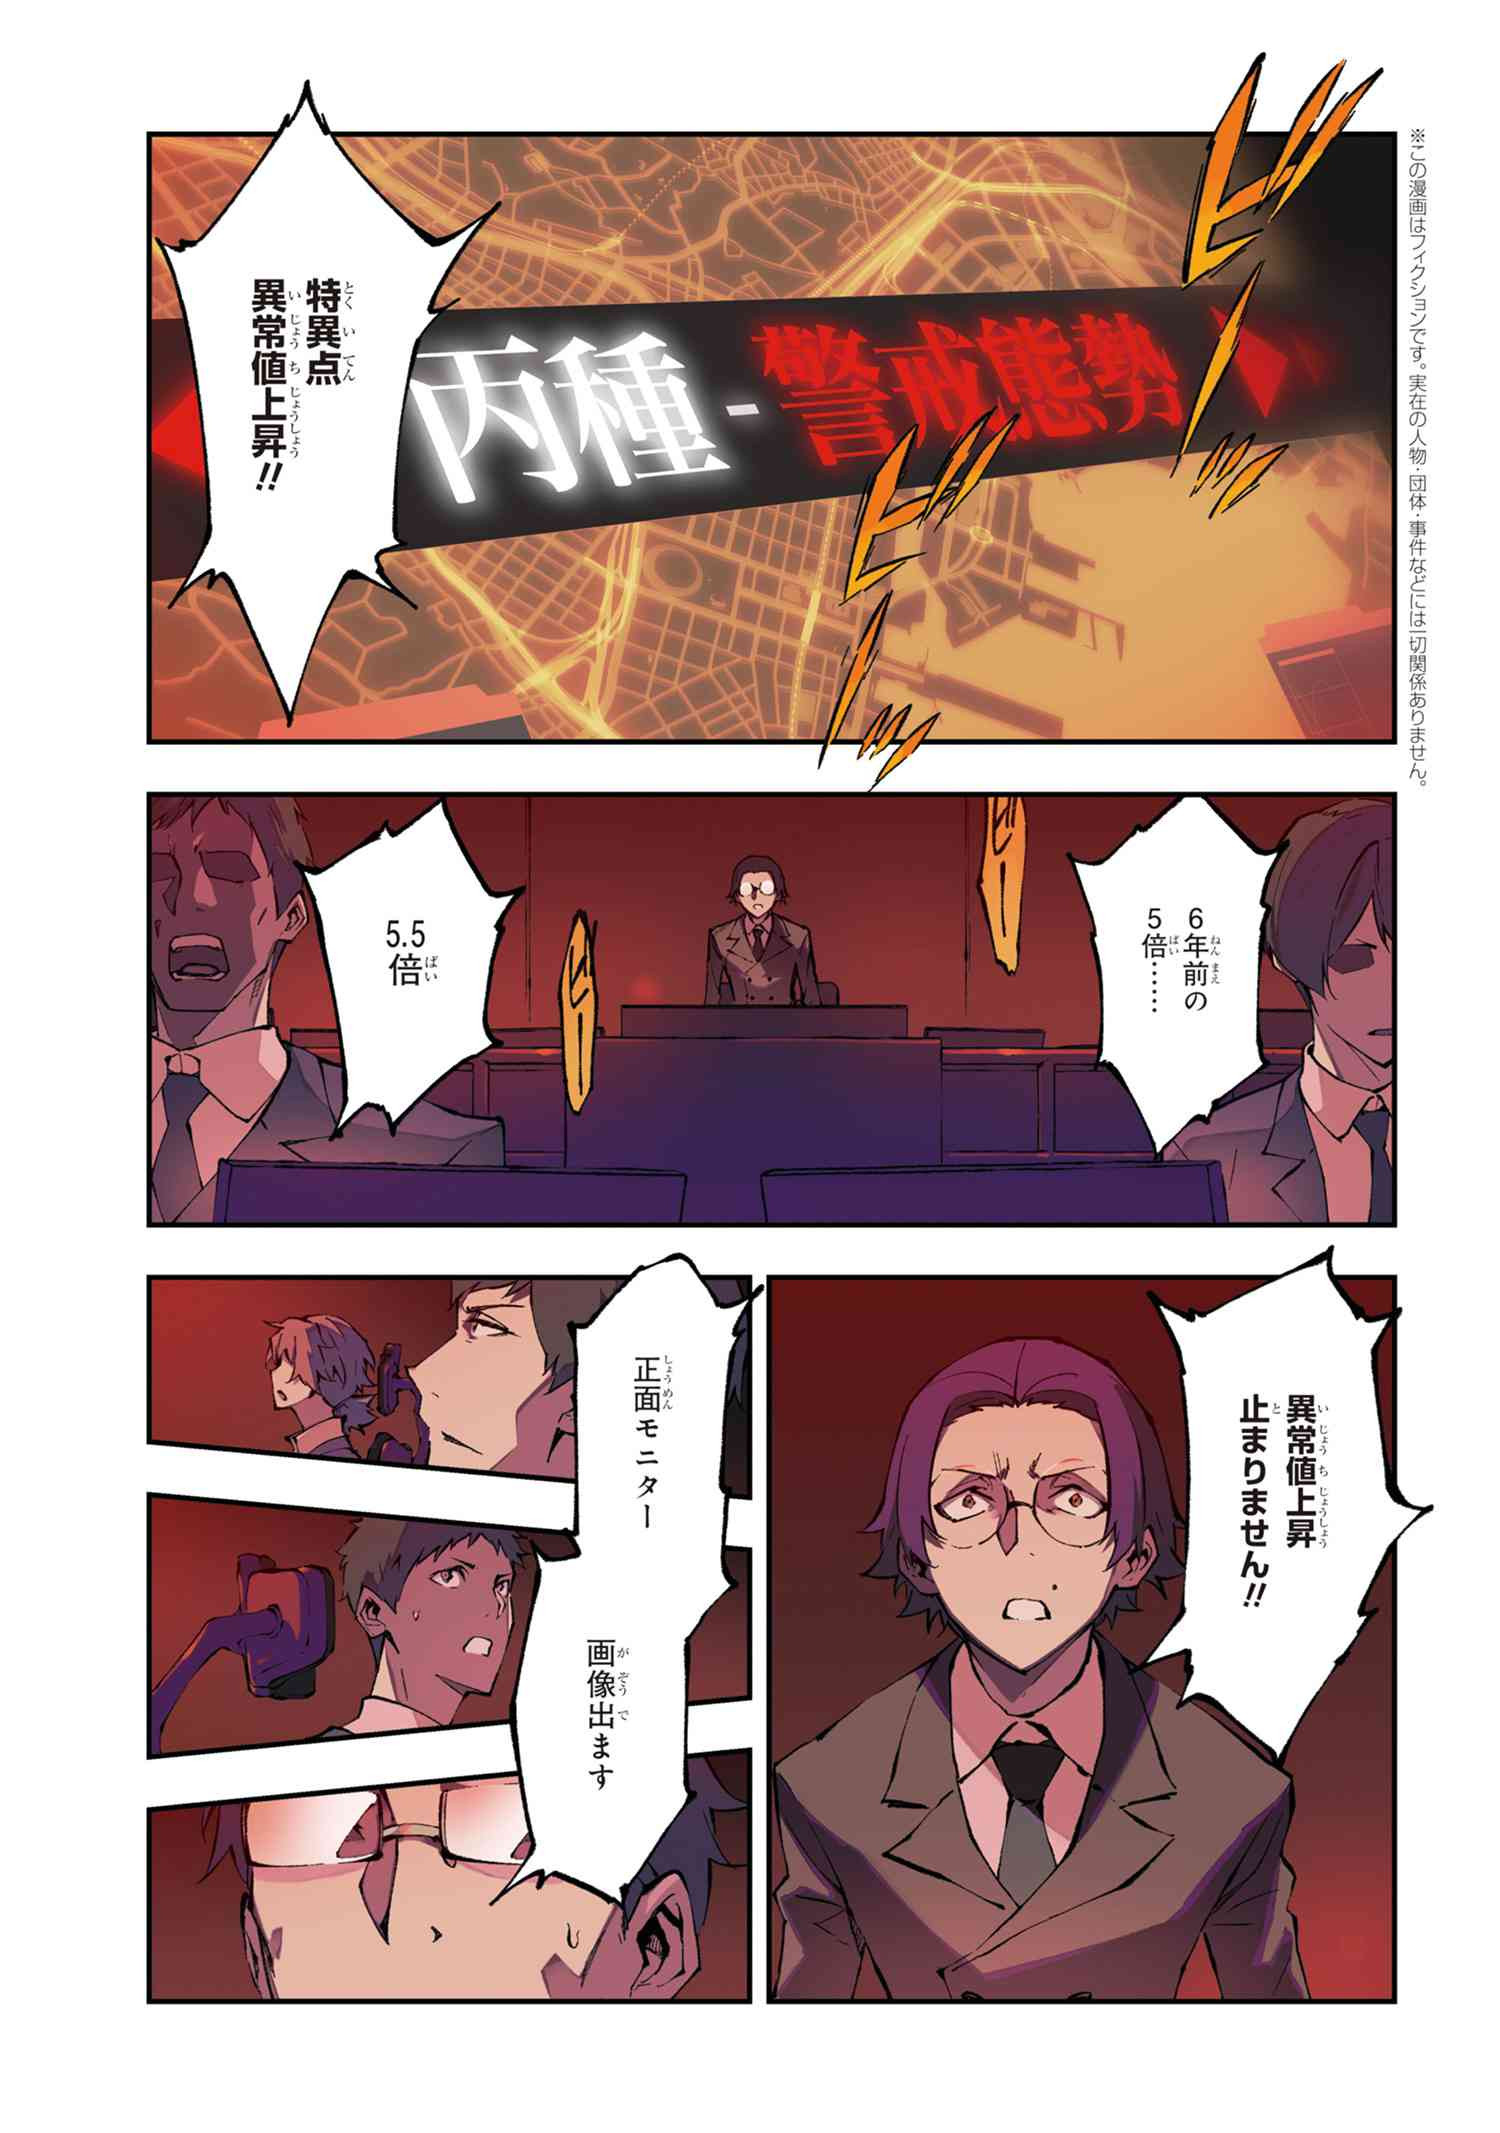 Bungou Stray Dogs: Dead Apple - Chapter 13-1 - Page 1